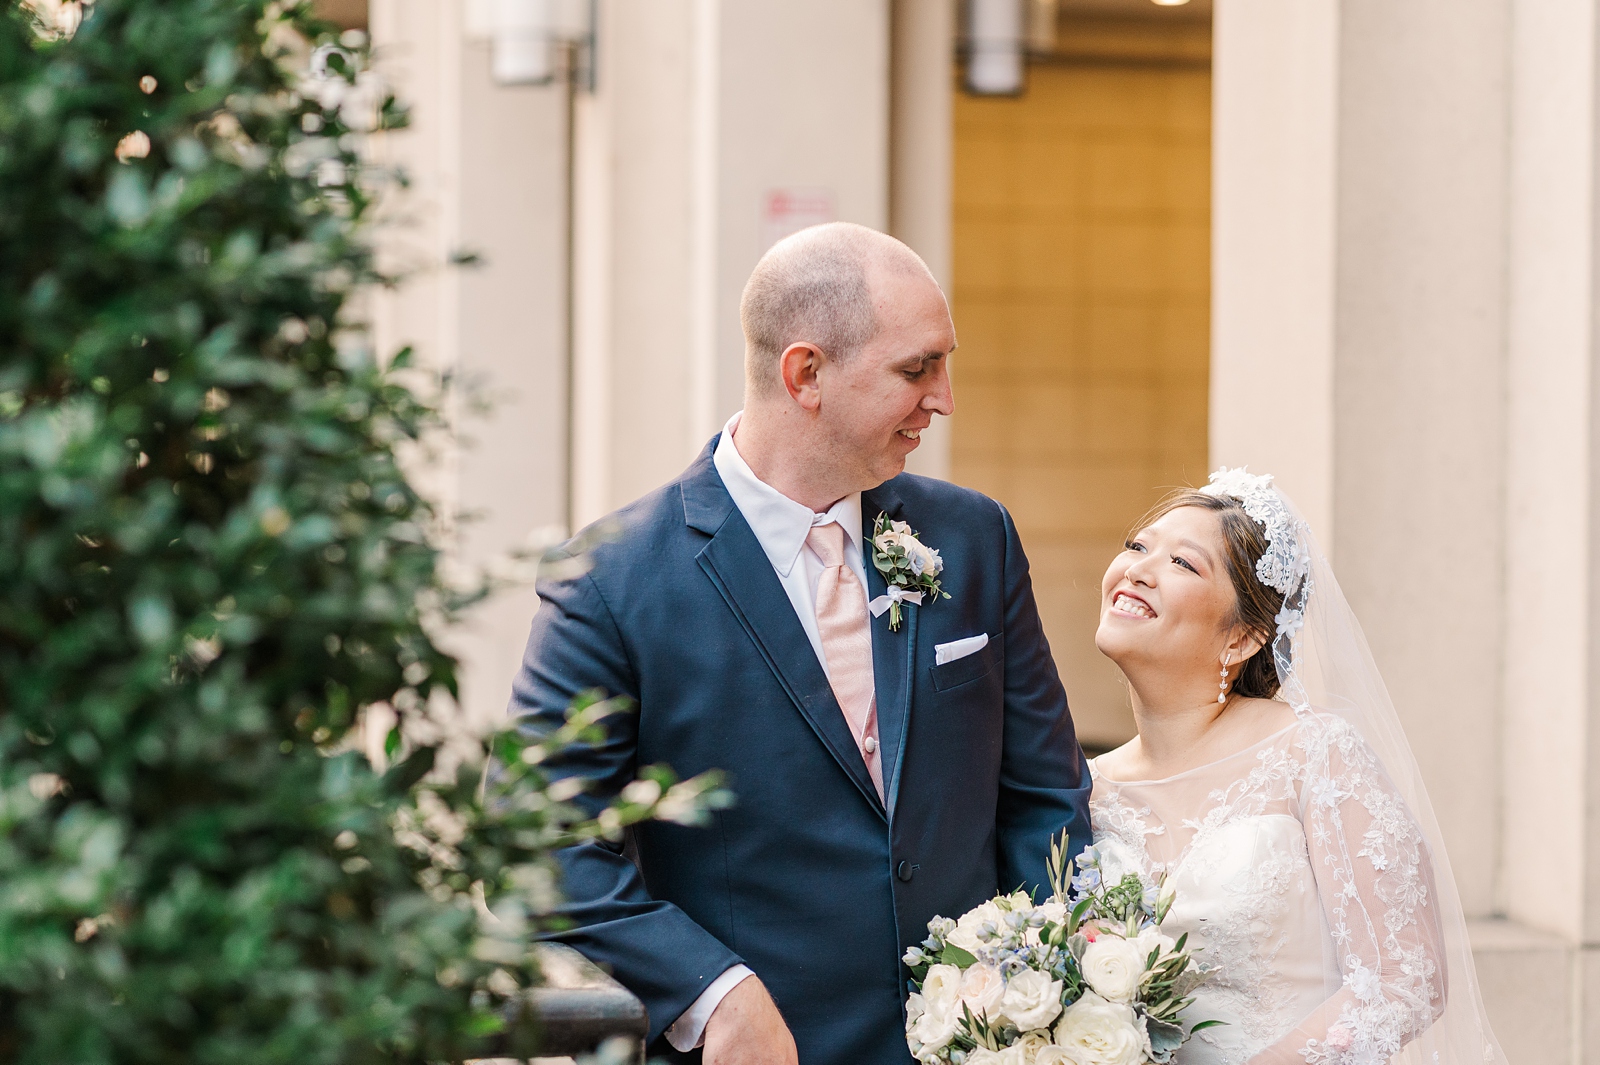 Bride and Groom Portraits at Richmond Omni Hotel Intimate Wedding. Photography by Virginia Wedding Photographer Kailey Brianne Photography. 

